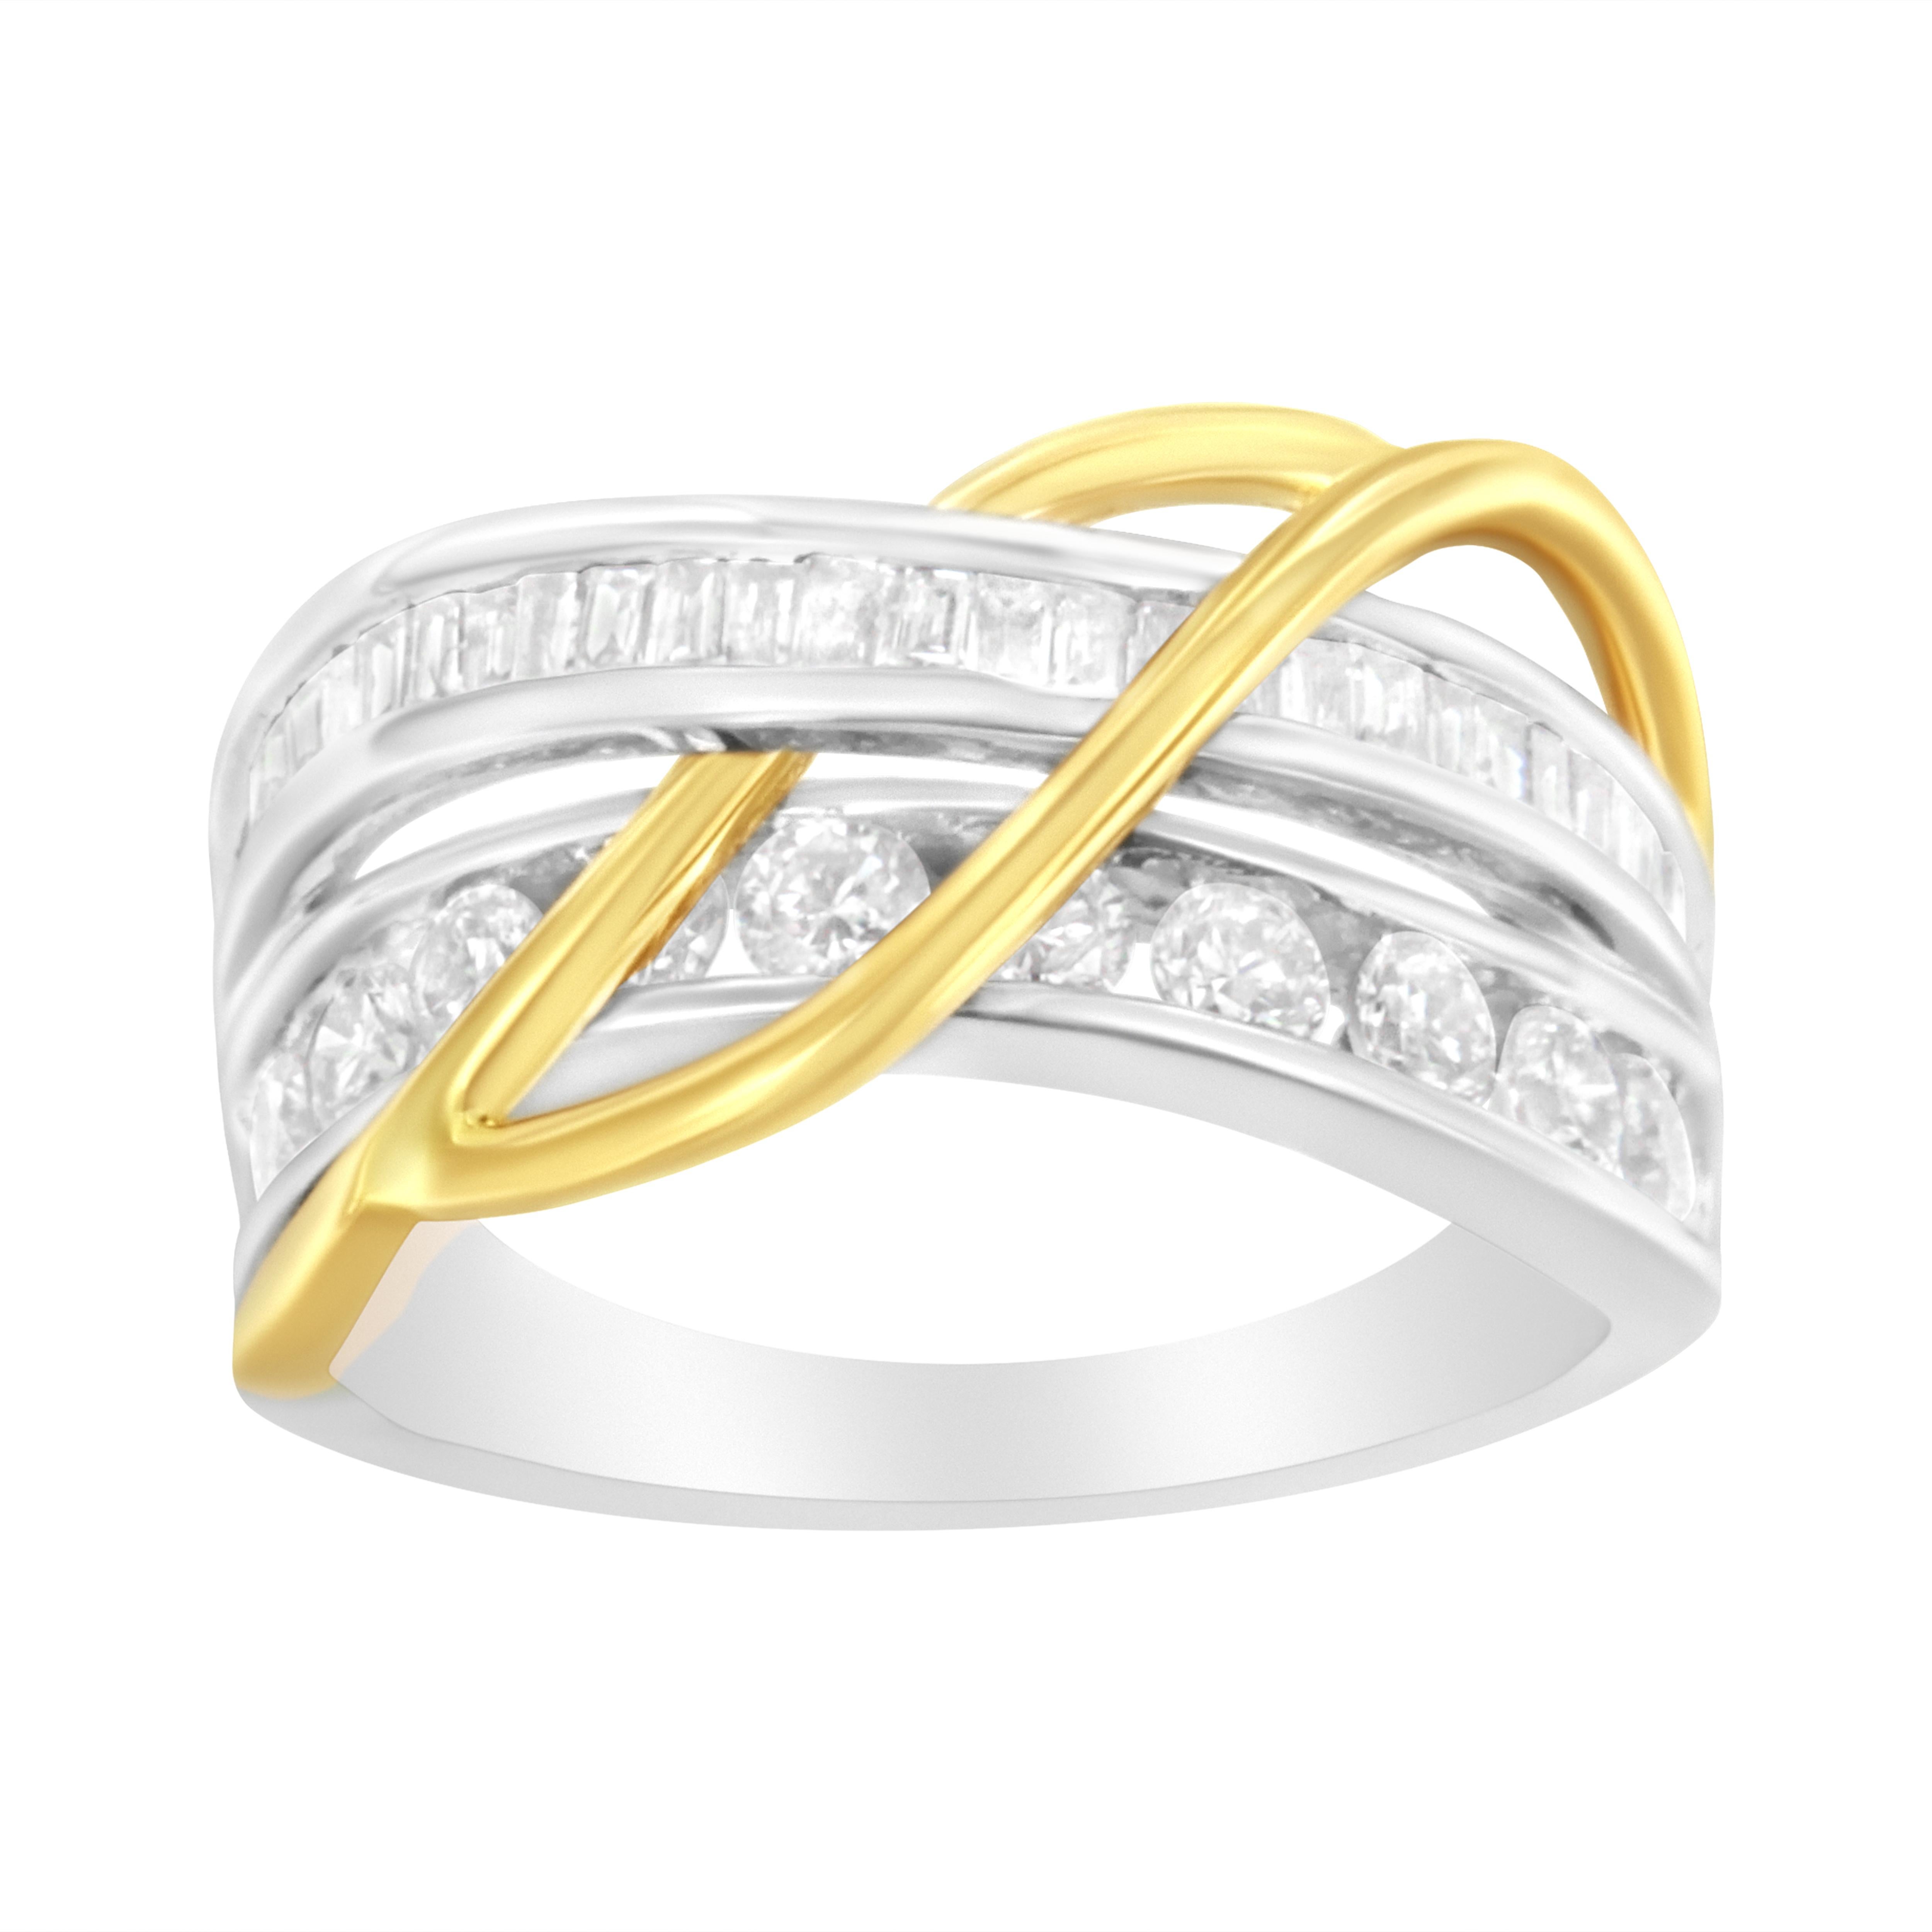 For Sale:  10K White and Yellow Gold 1 1/10 Carat Channel-Set Diamond Bypass Band Ring 2